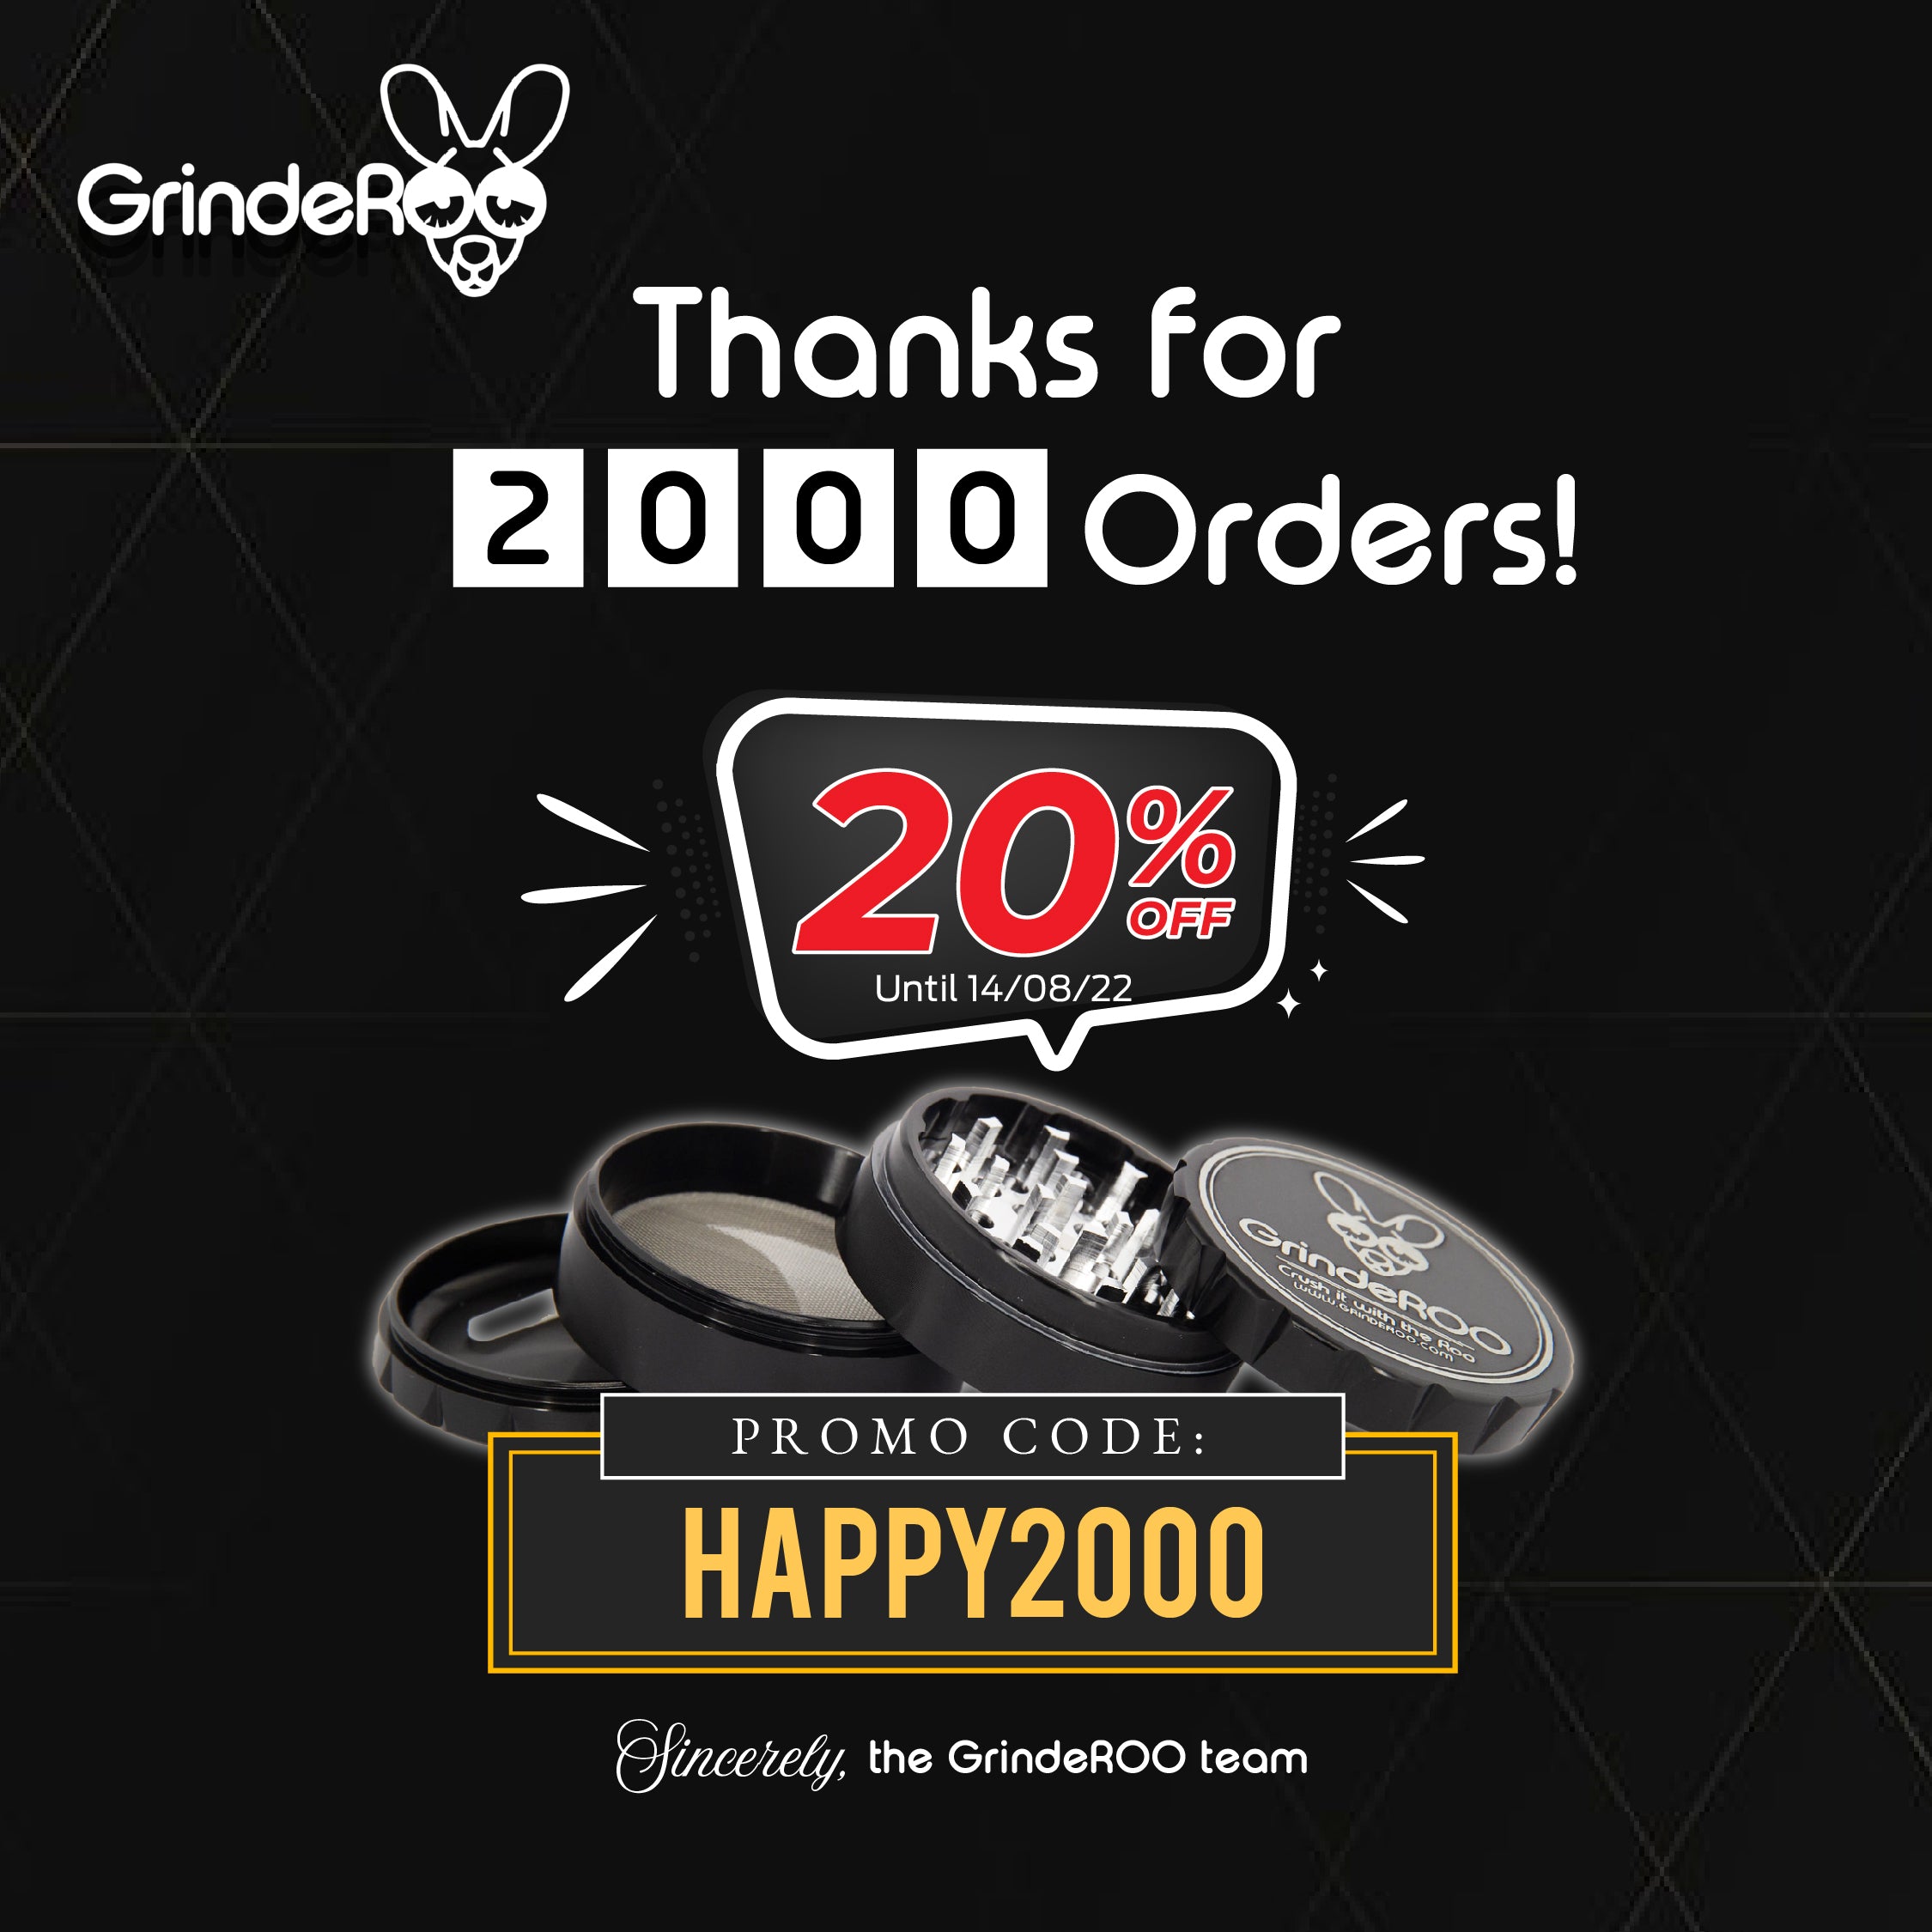 Thanks for 2000 Orders - HAPPY2000